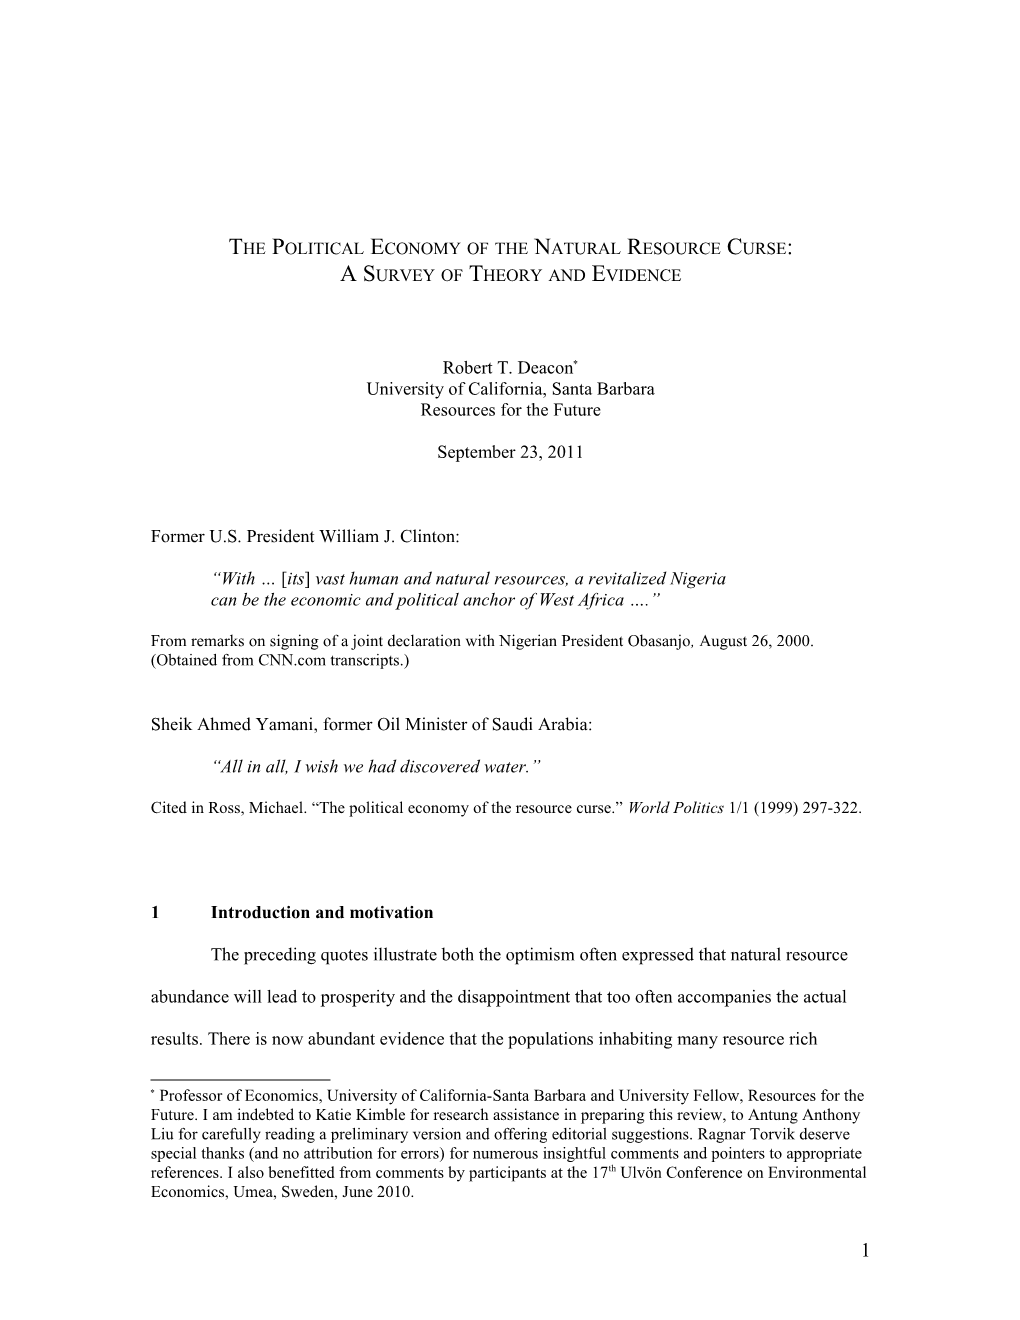 Political Institutions and the Natural Resource Curse: an Interpretive Survey